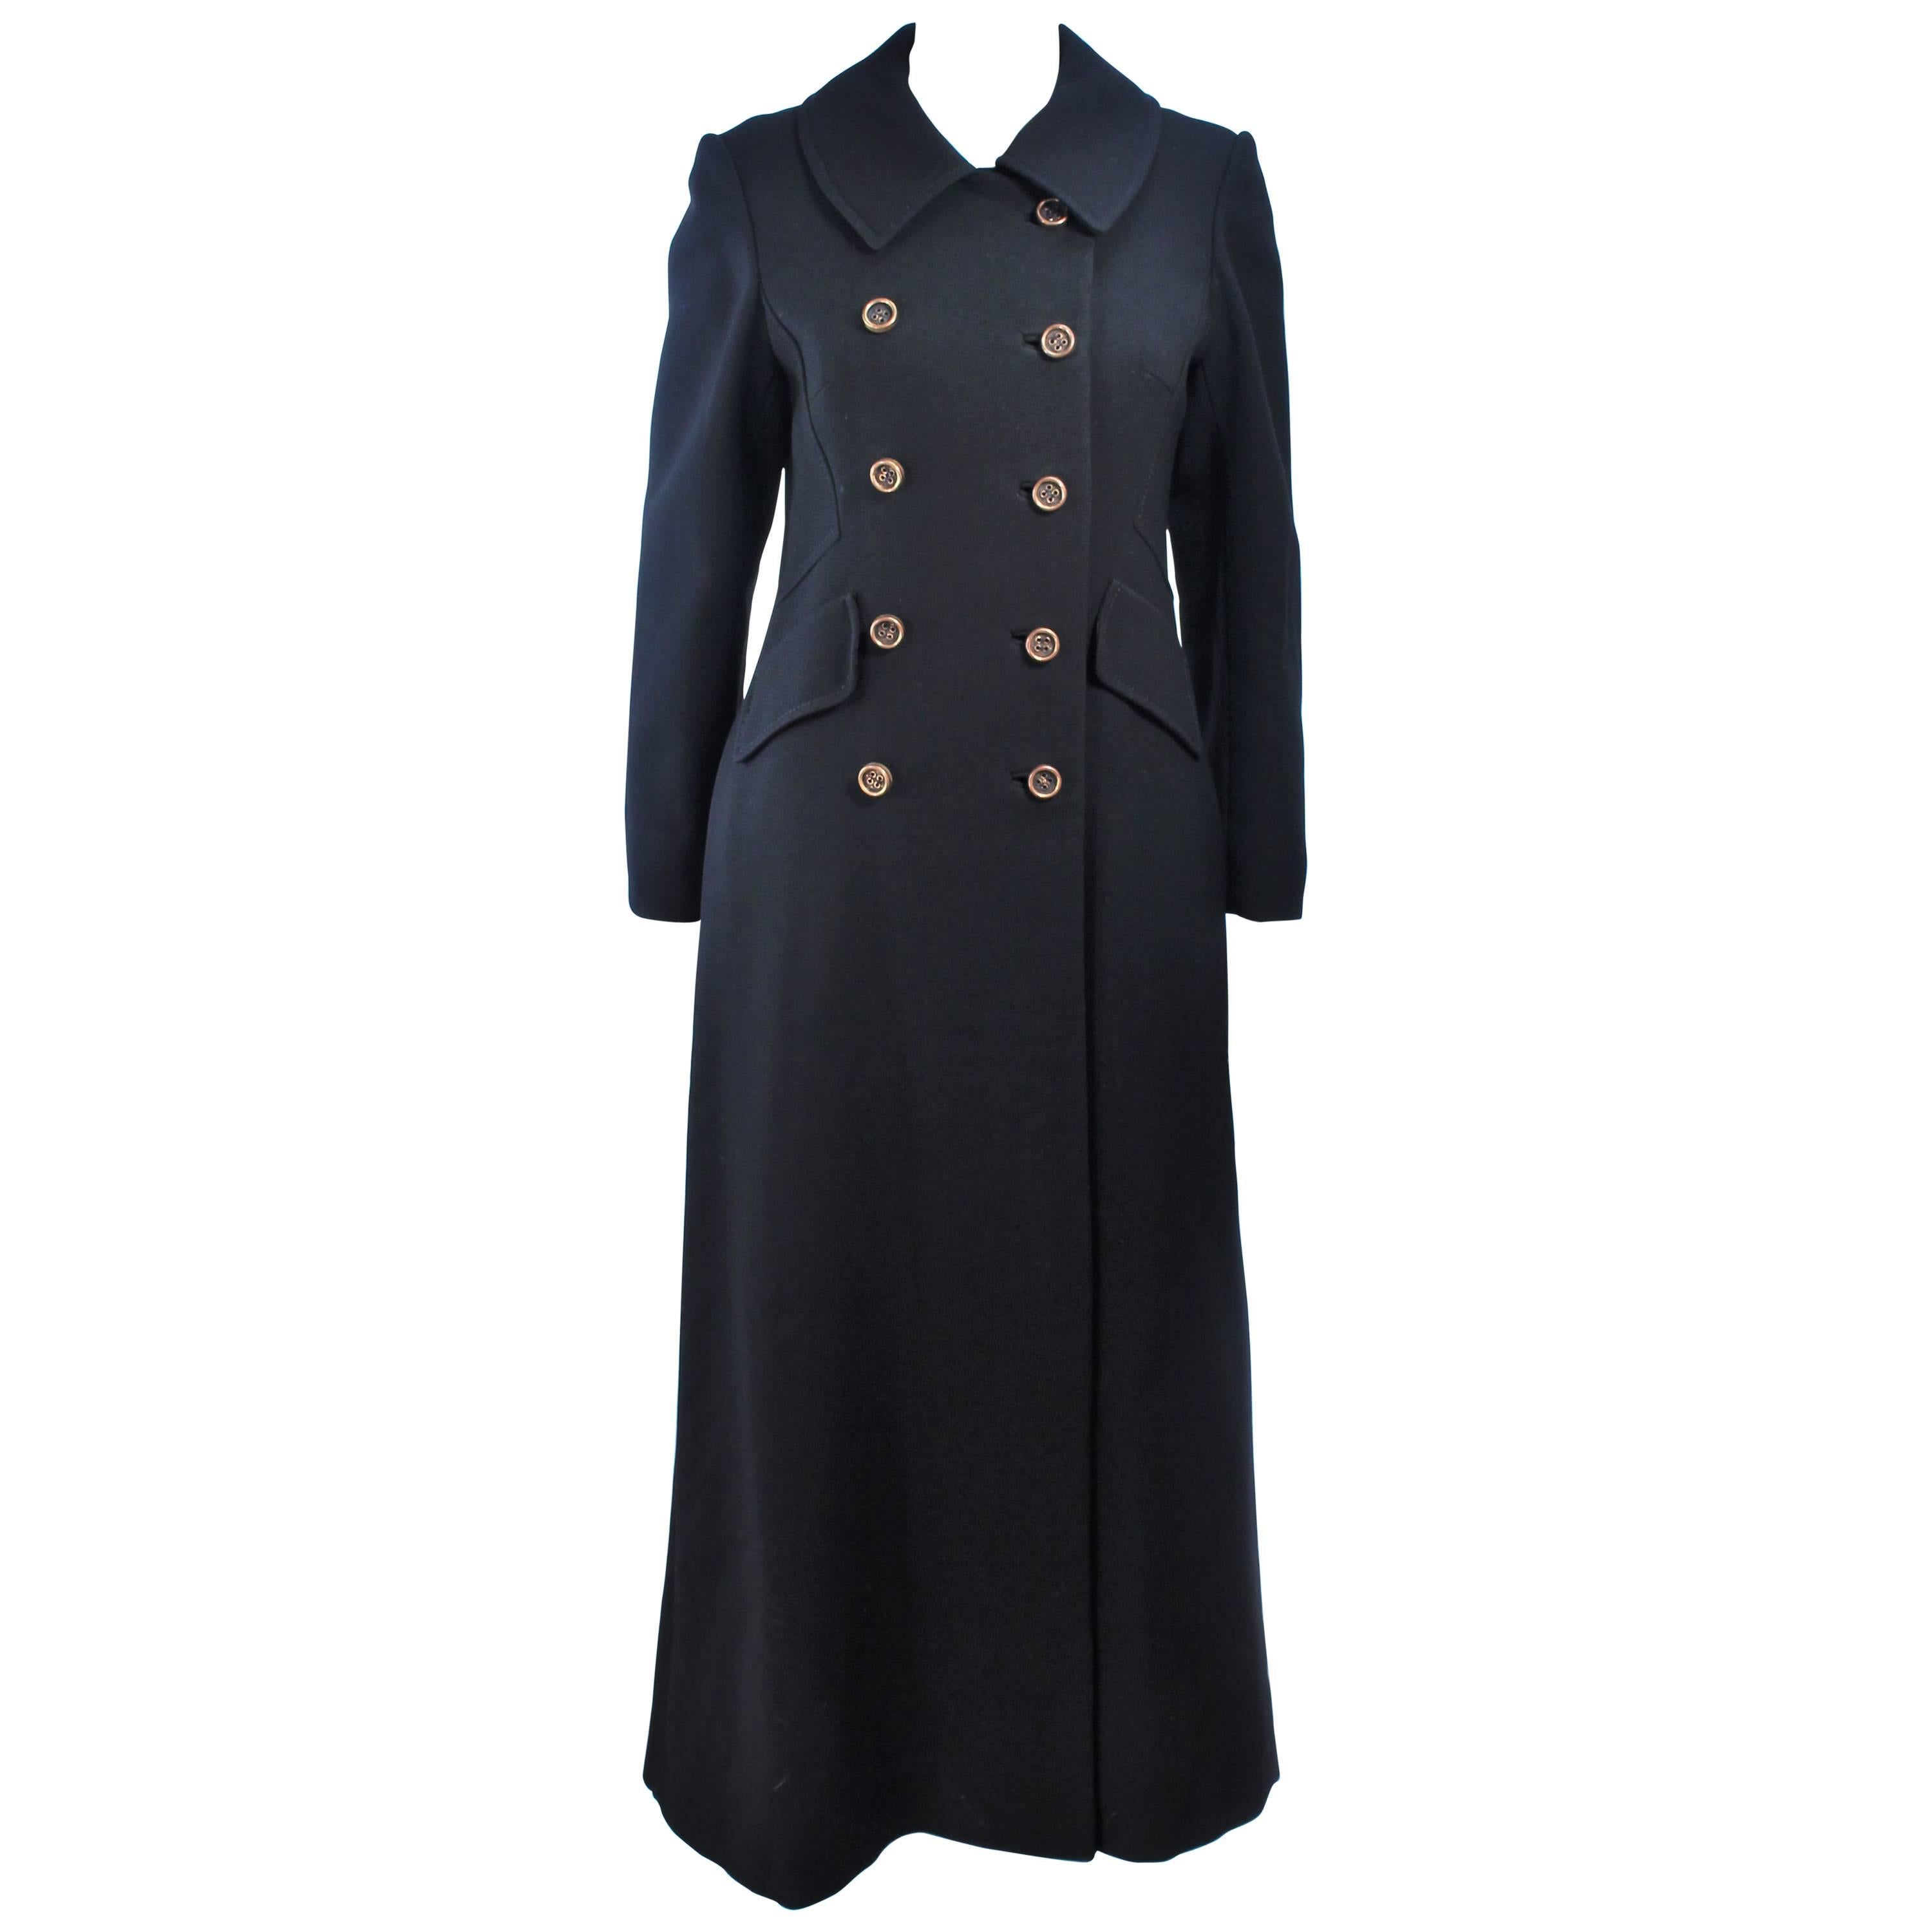 ALTON LEWIS Double Breasted Full Length Tailored Coat Size 4 6 For Sale